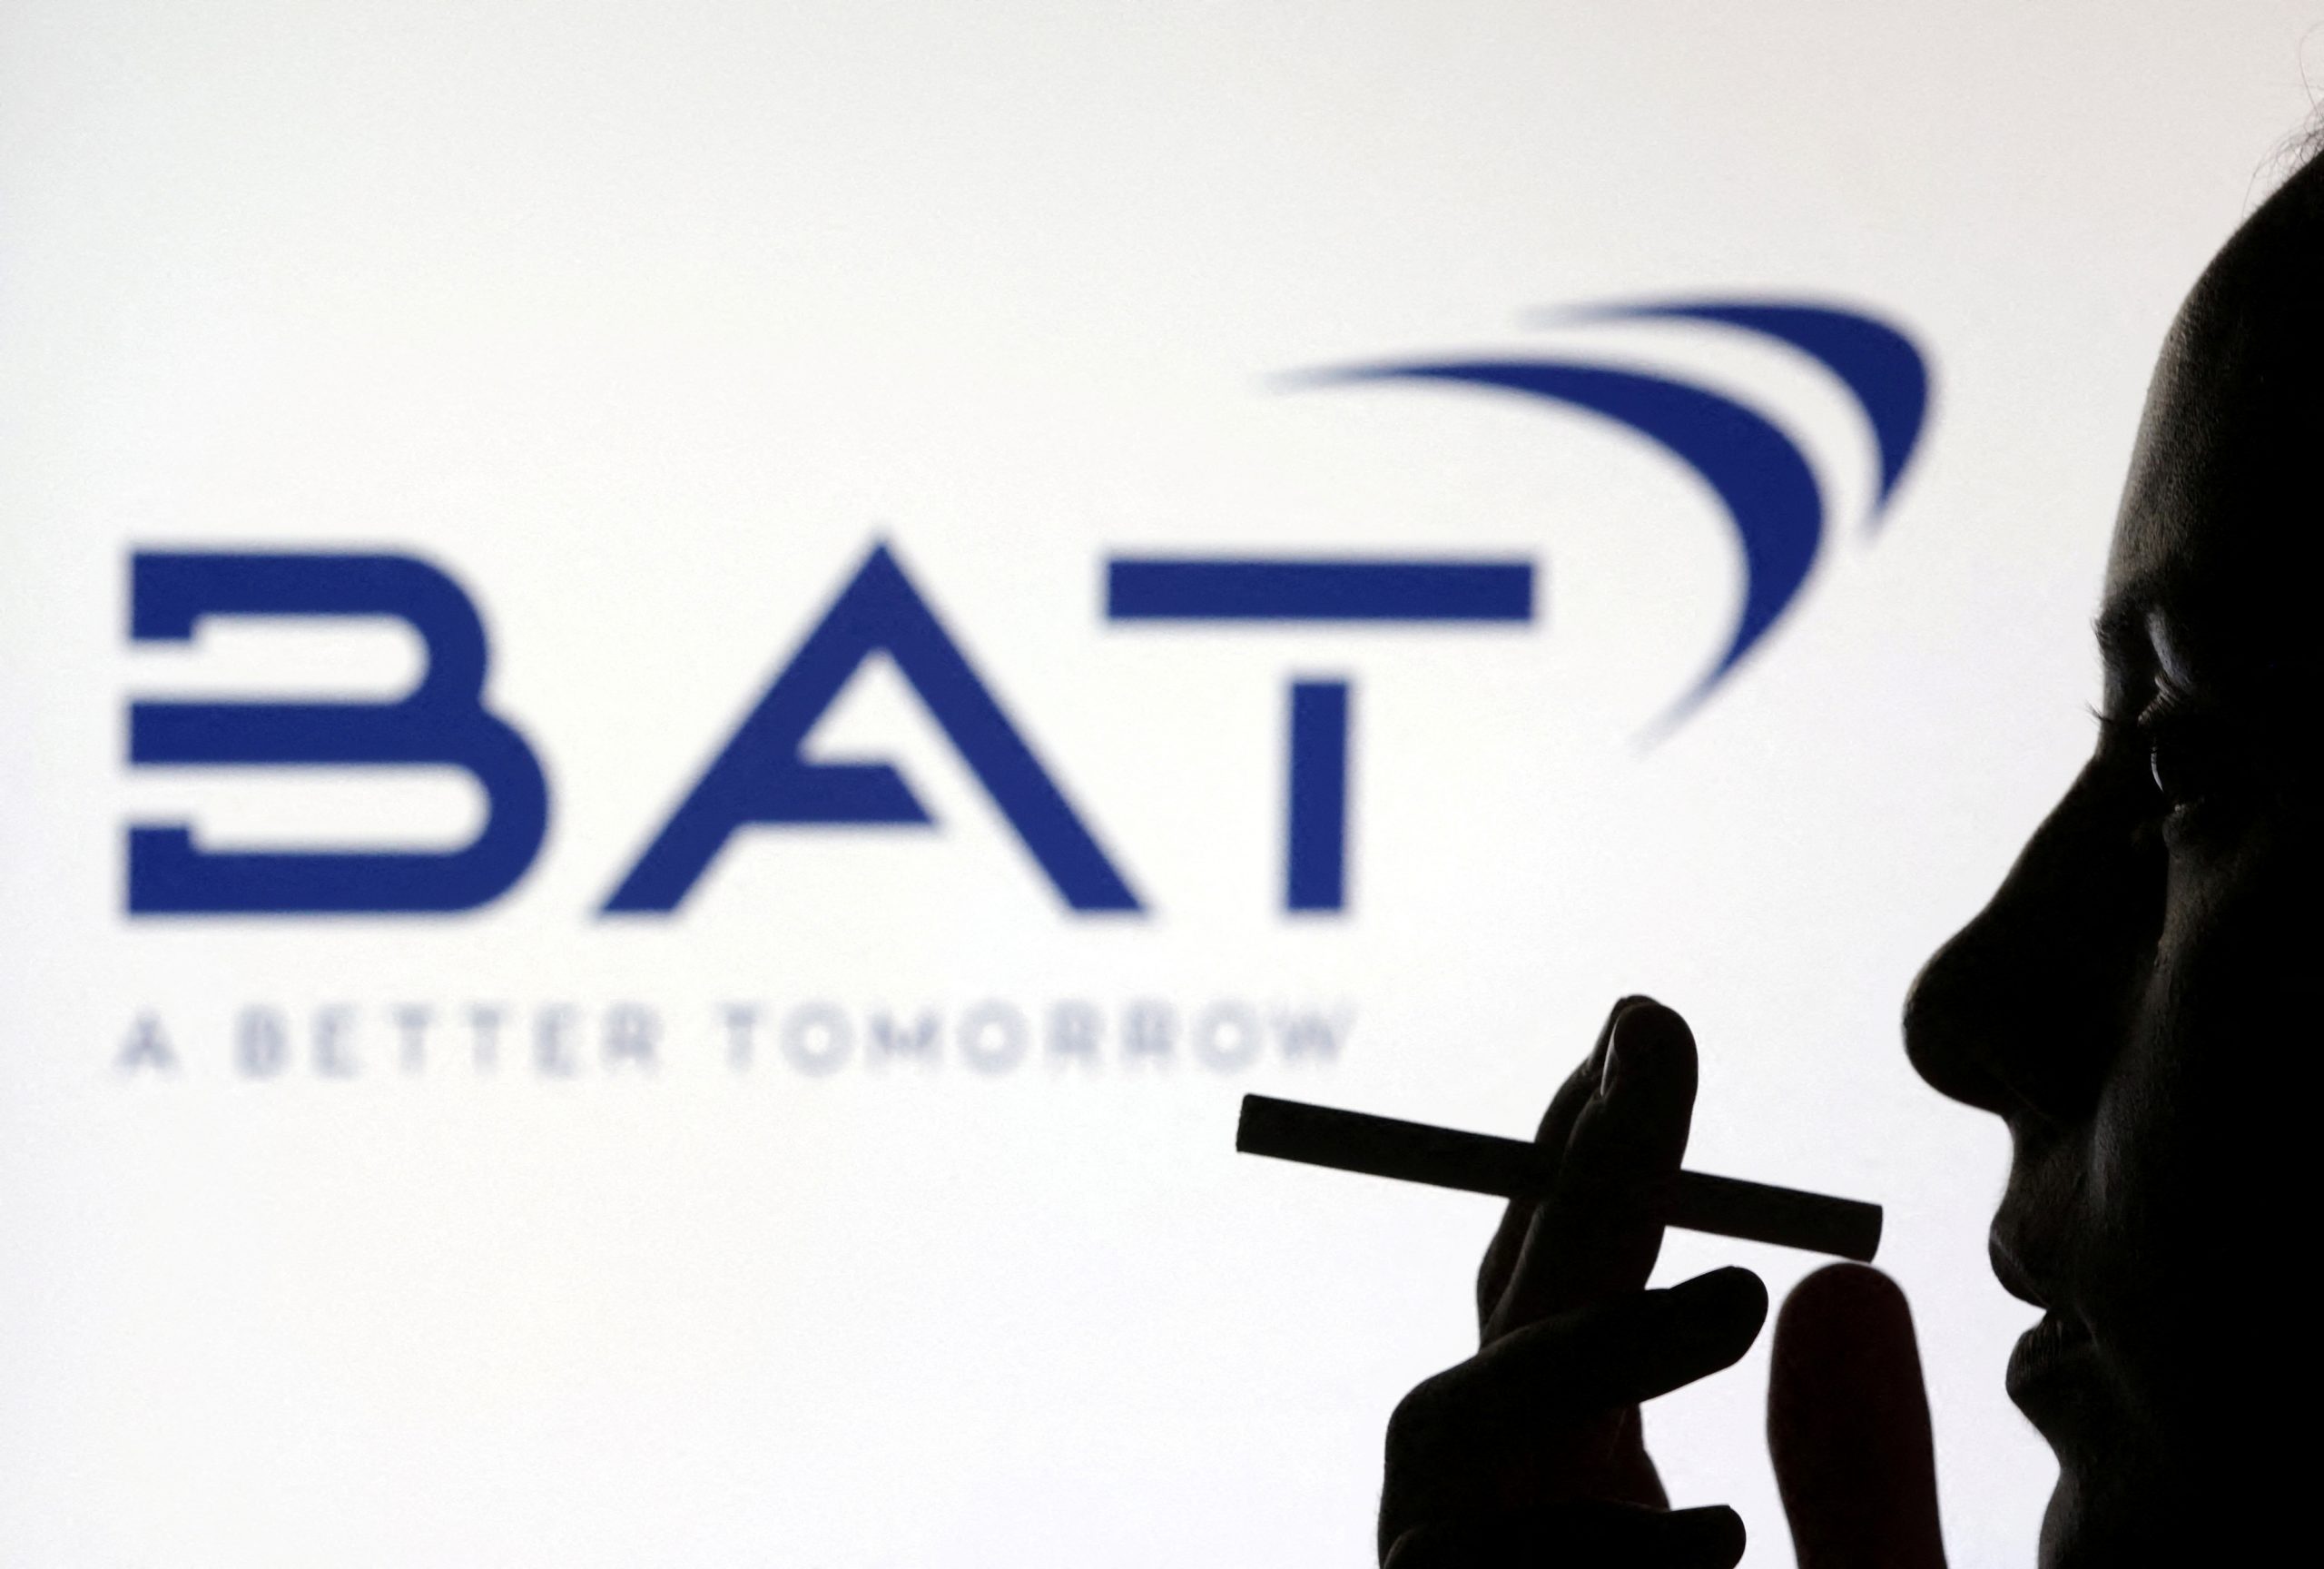 E-cigarettes, oral nicotine driving growth at BAT